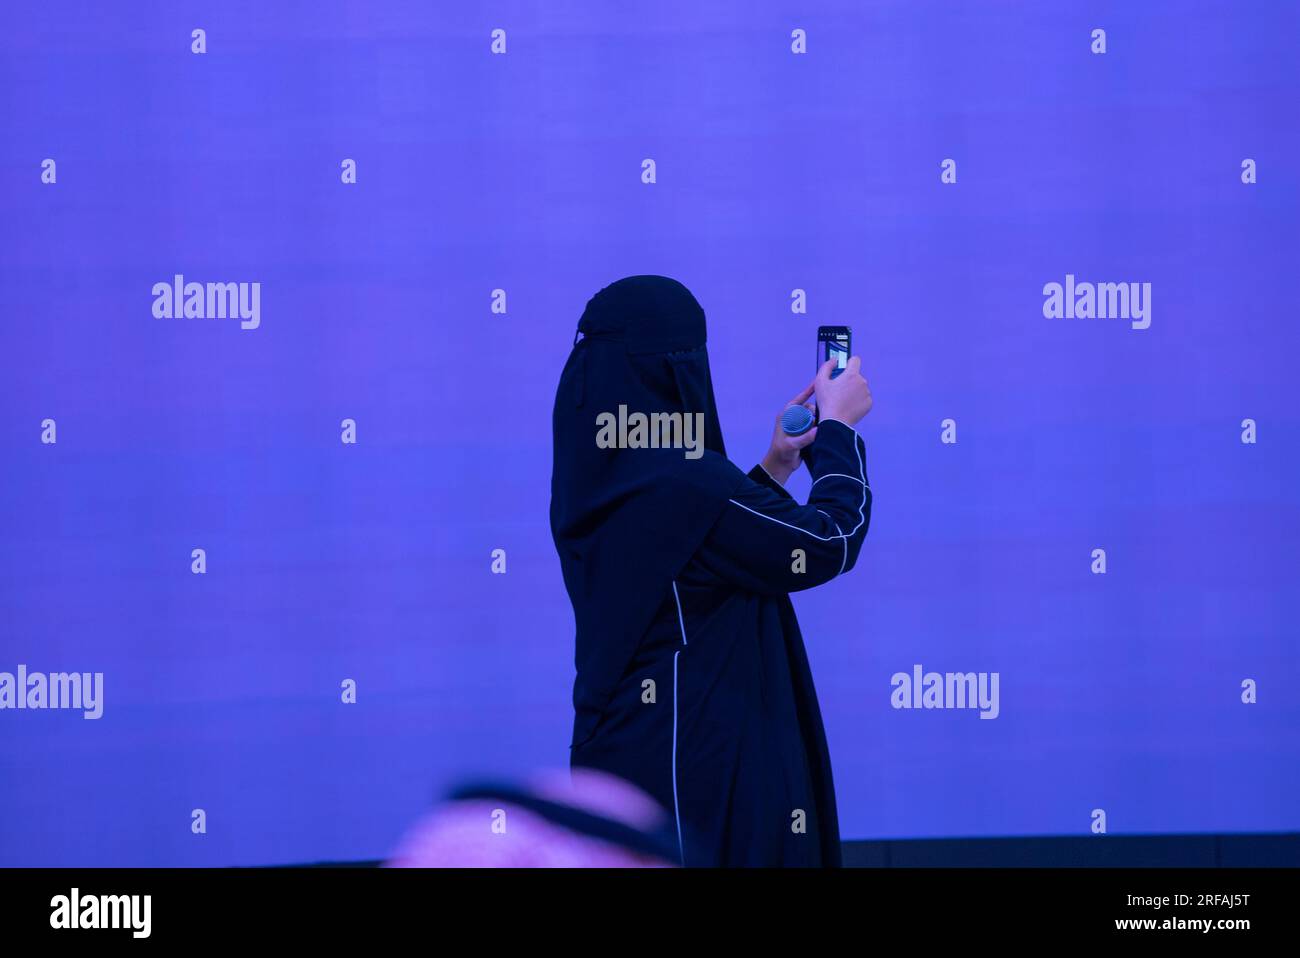 A Saudi woman takes pictures with her mobile phone in a business meeting Stock Photo